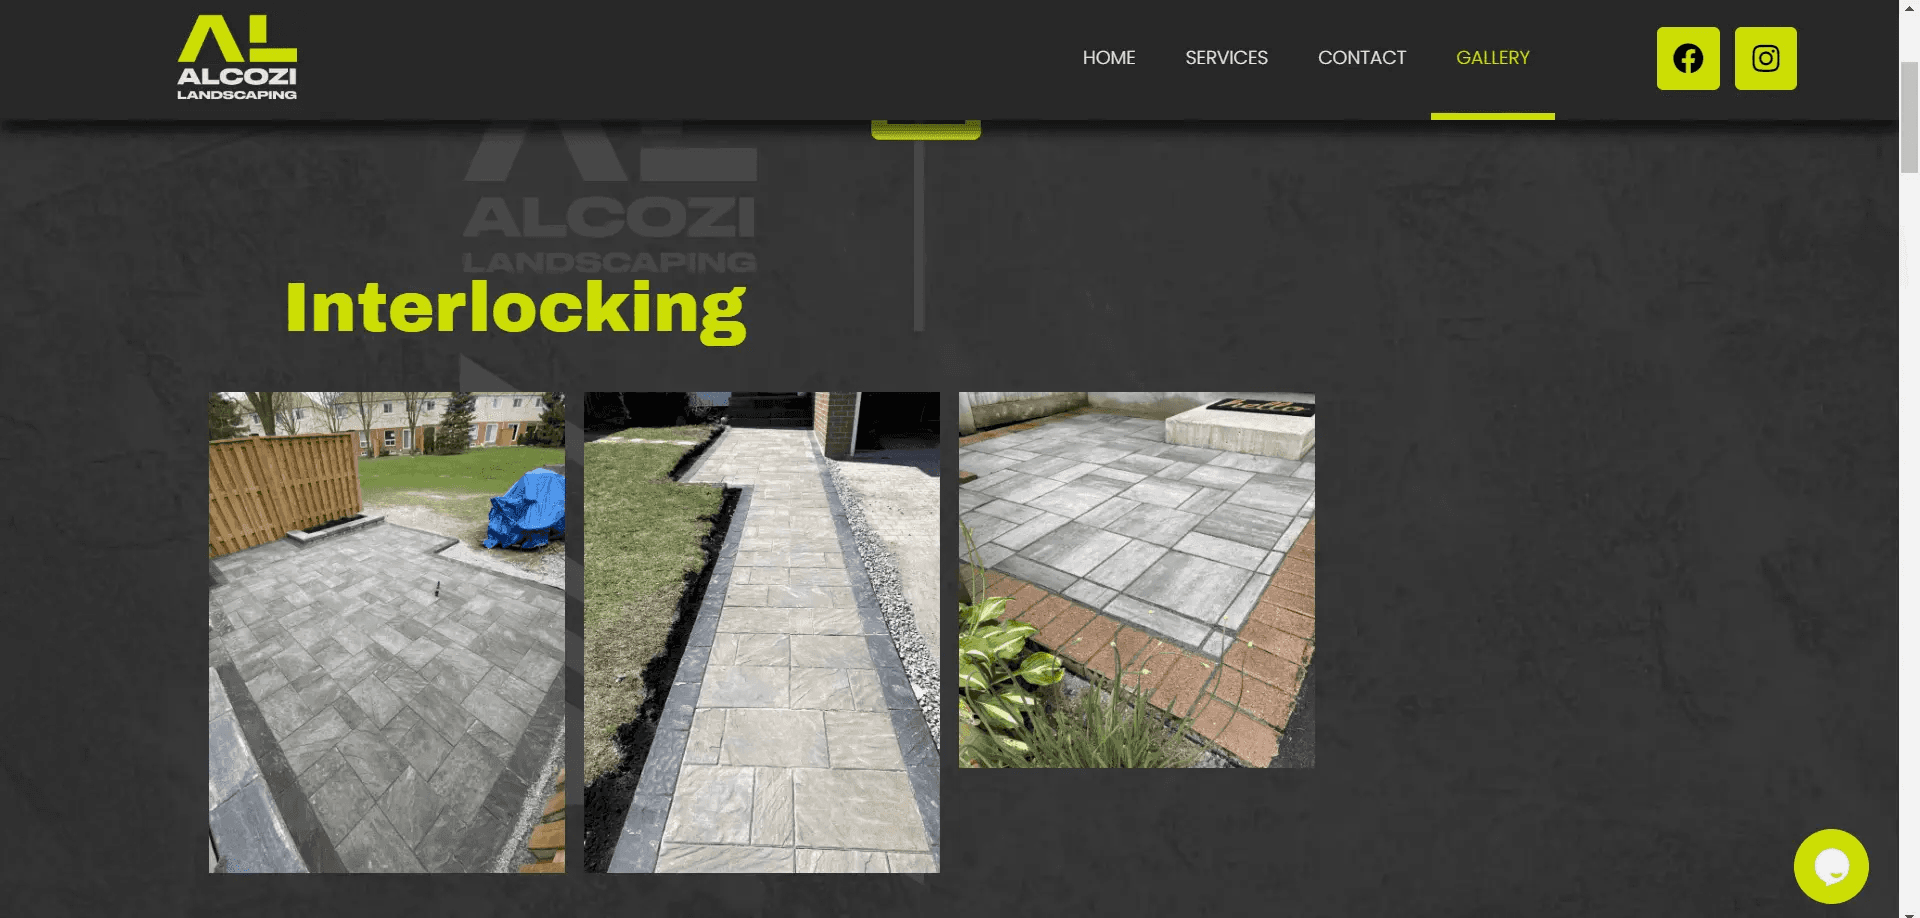 An image gallery page, showing several examples of outdoor walkways and patios created with interlocking stone bricks